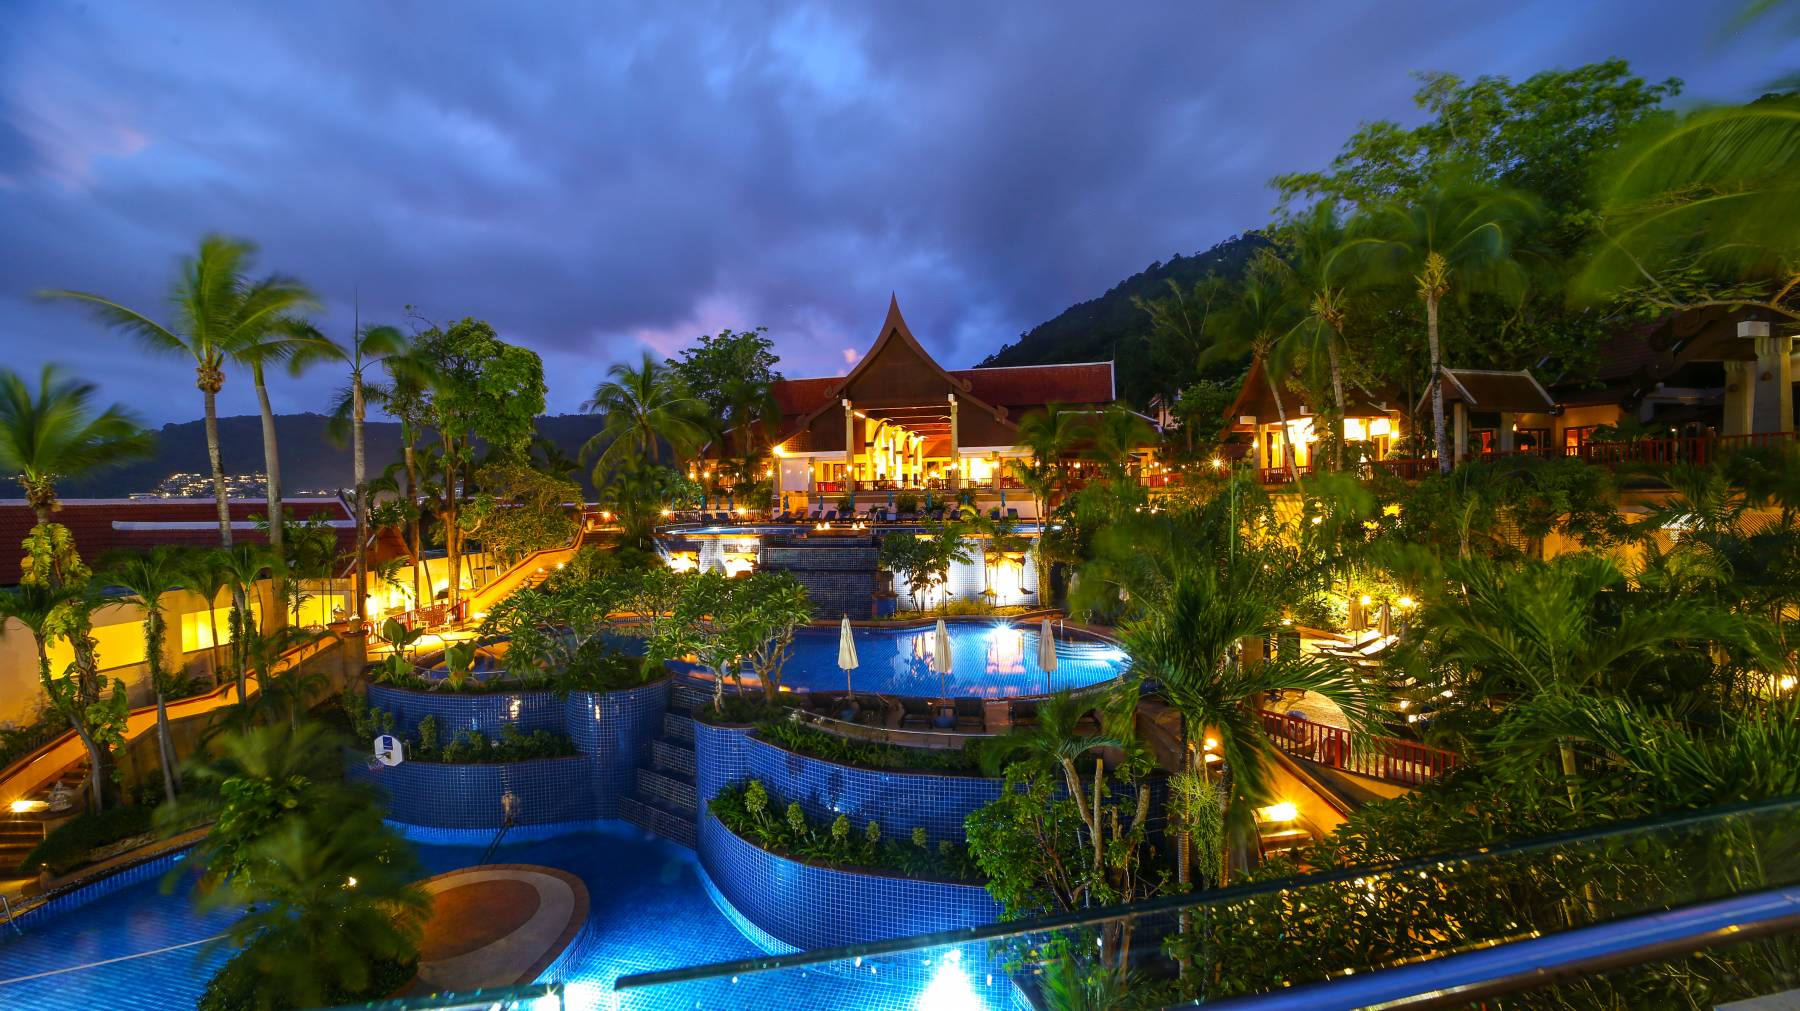 Novotel Phuket Resort Your Guide To Finding The Perfect Hotel In Patong Beach Phuket